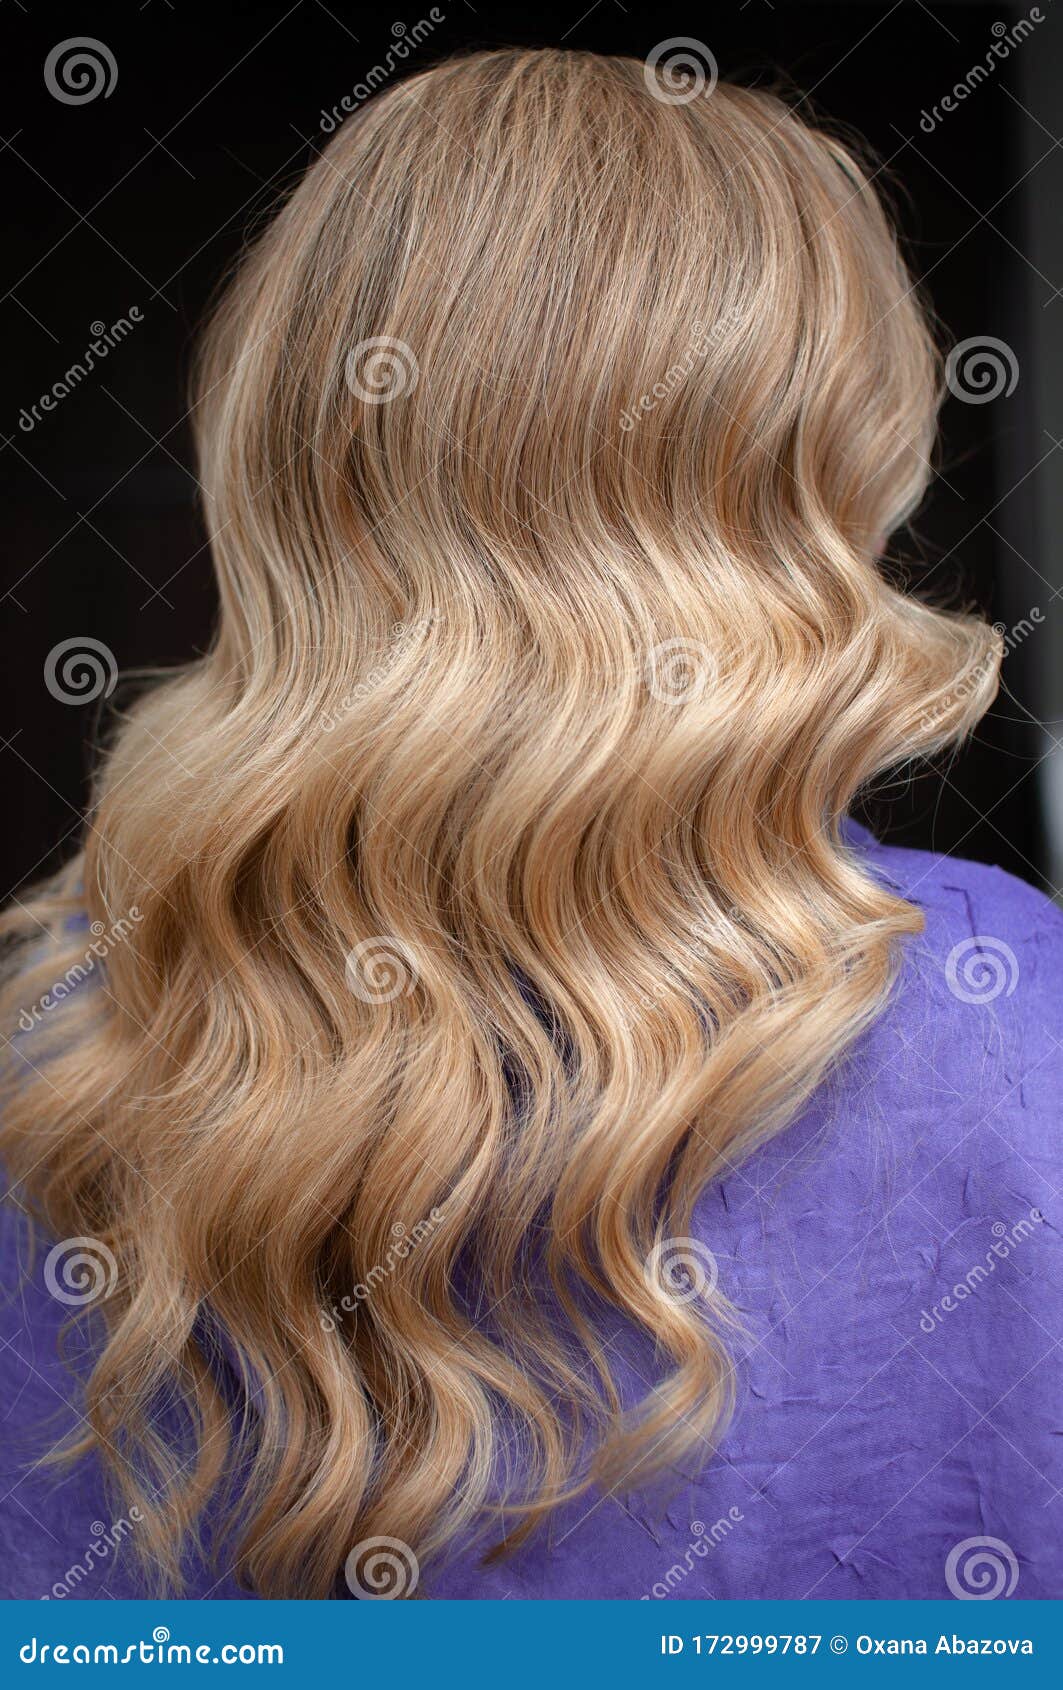 Long Hair of a Blonde Woman with Wave Hairstyle Stock Image - Image of  color, curly: 172999787